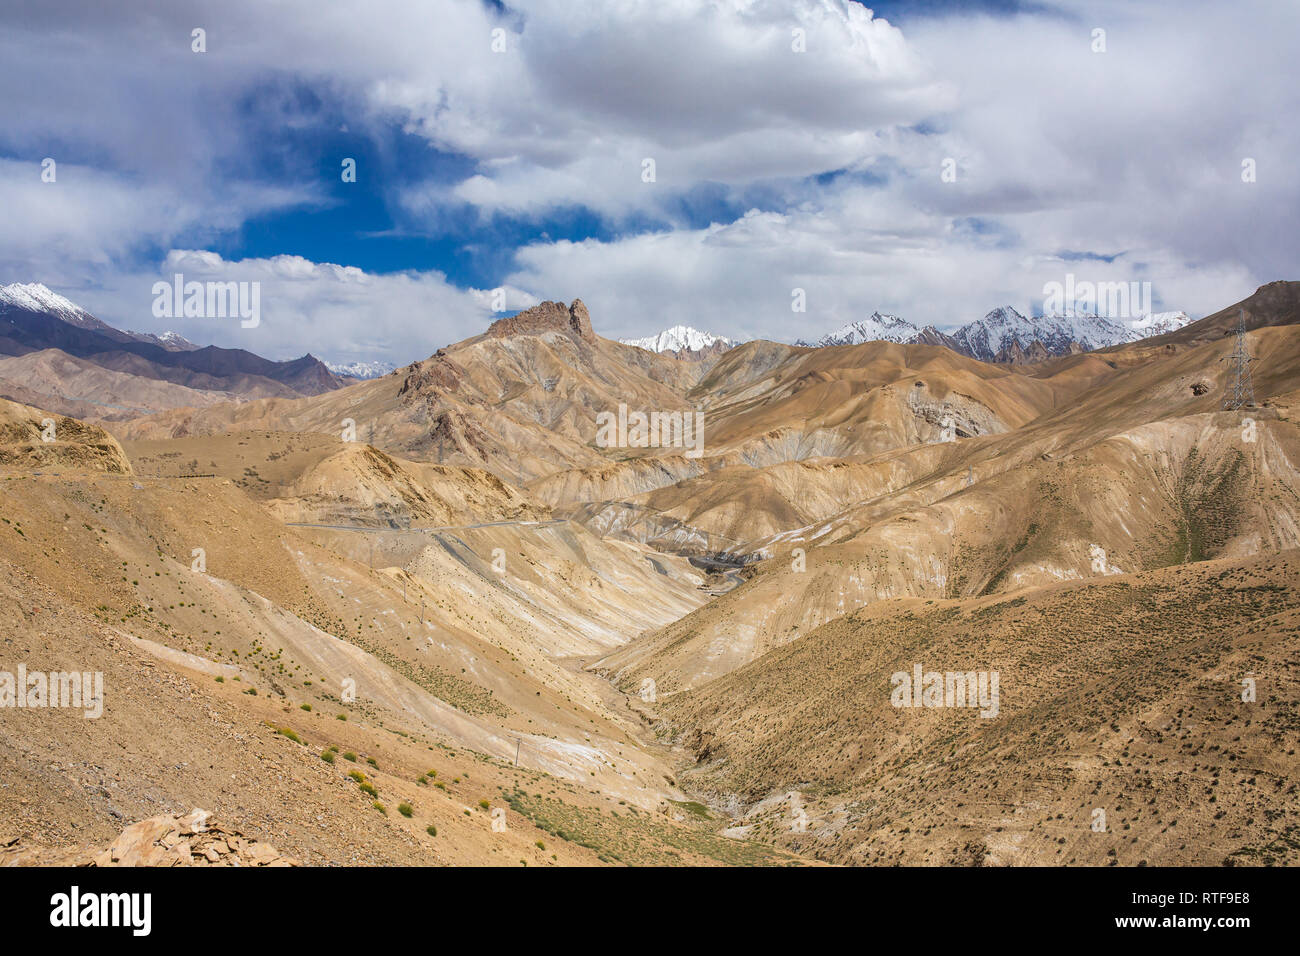 Beautiful mountain landscape. View from the Manali - Leh road in Ladakh, Jammu and Kashmir, India Stock Photo